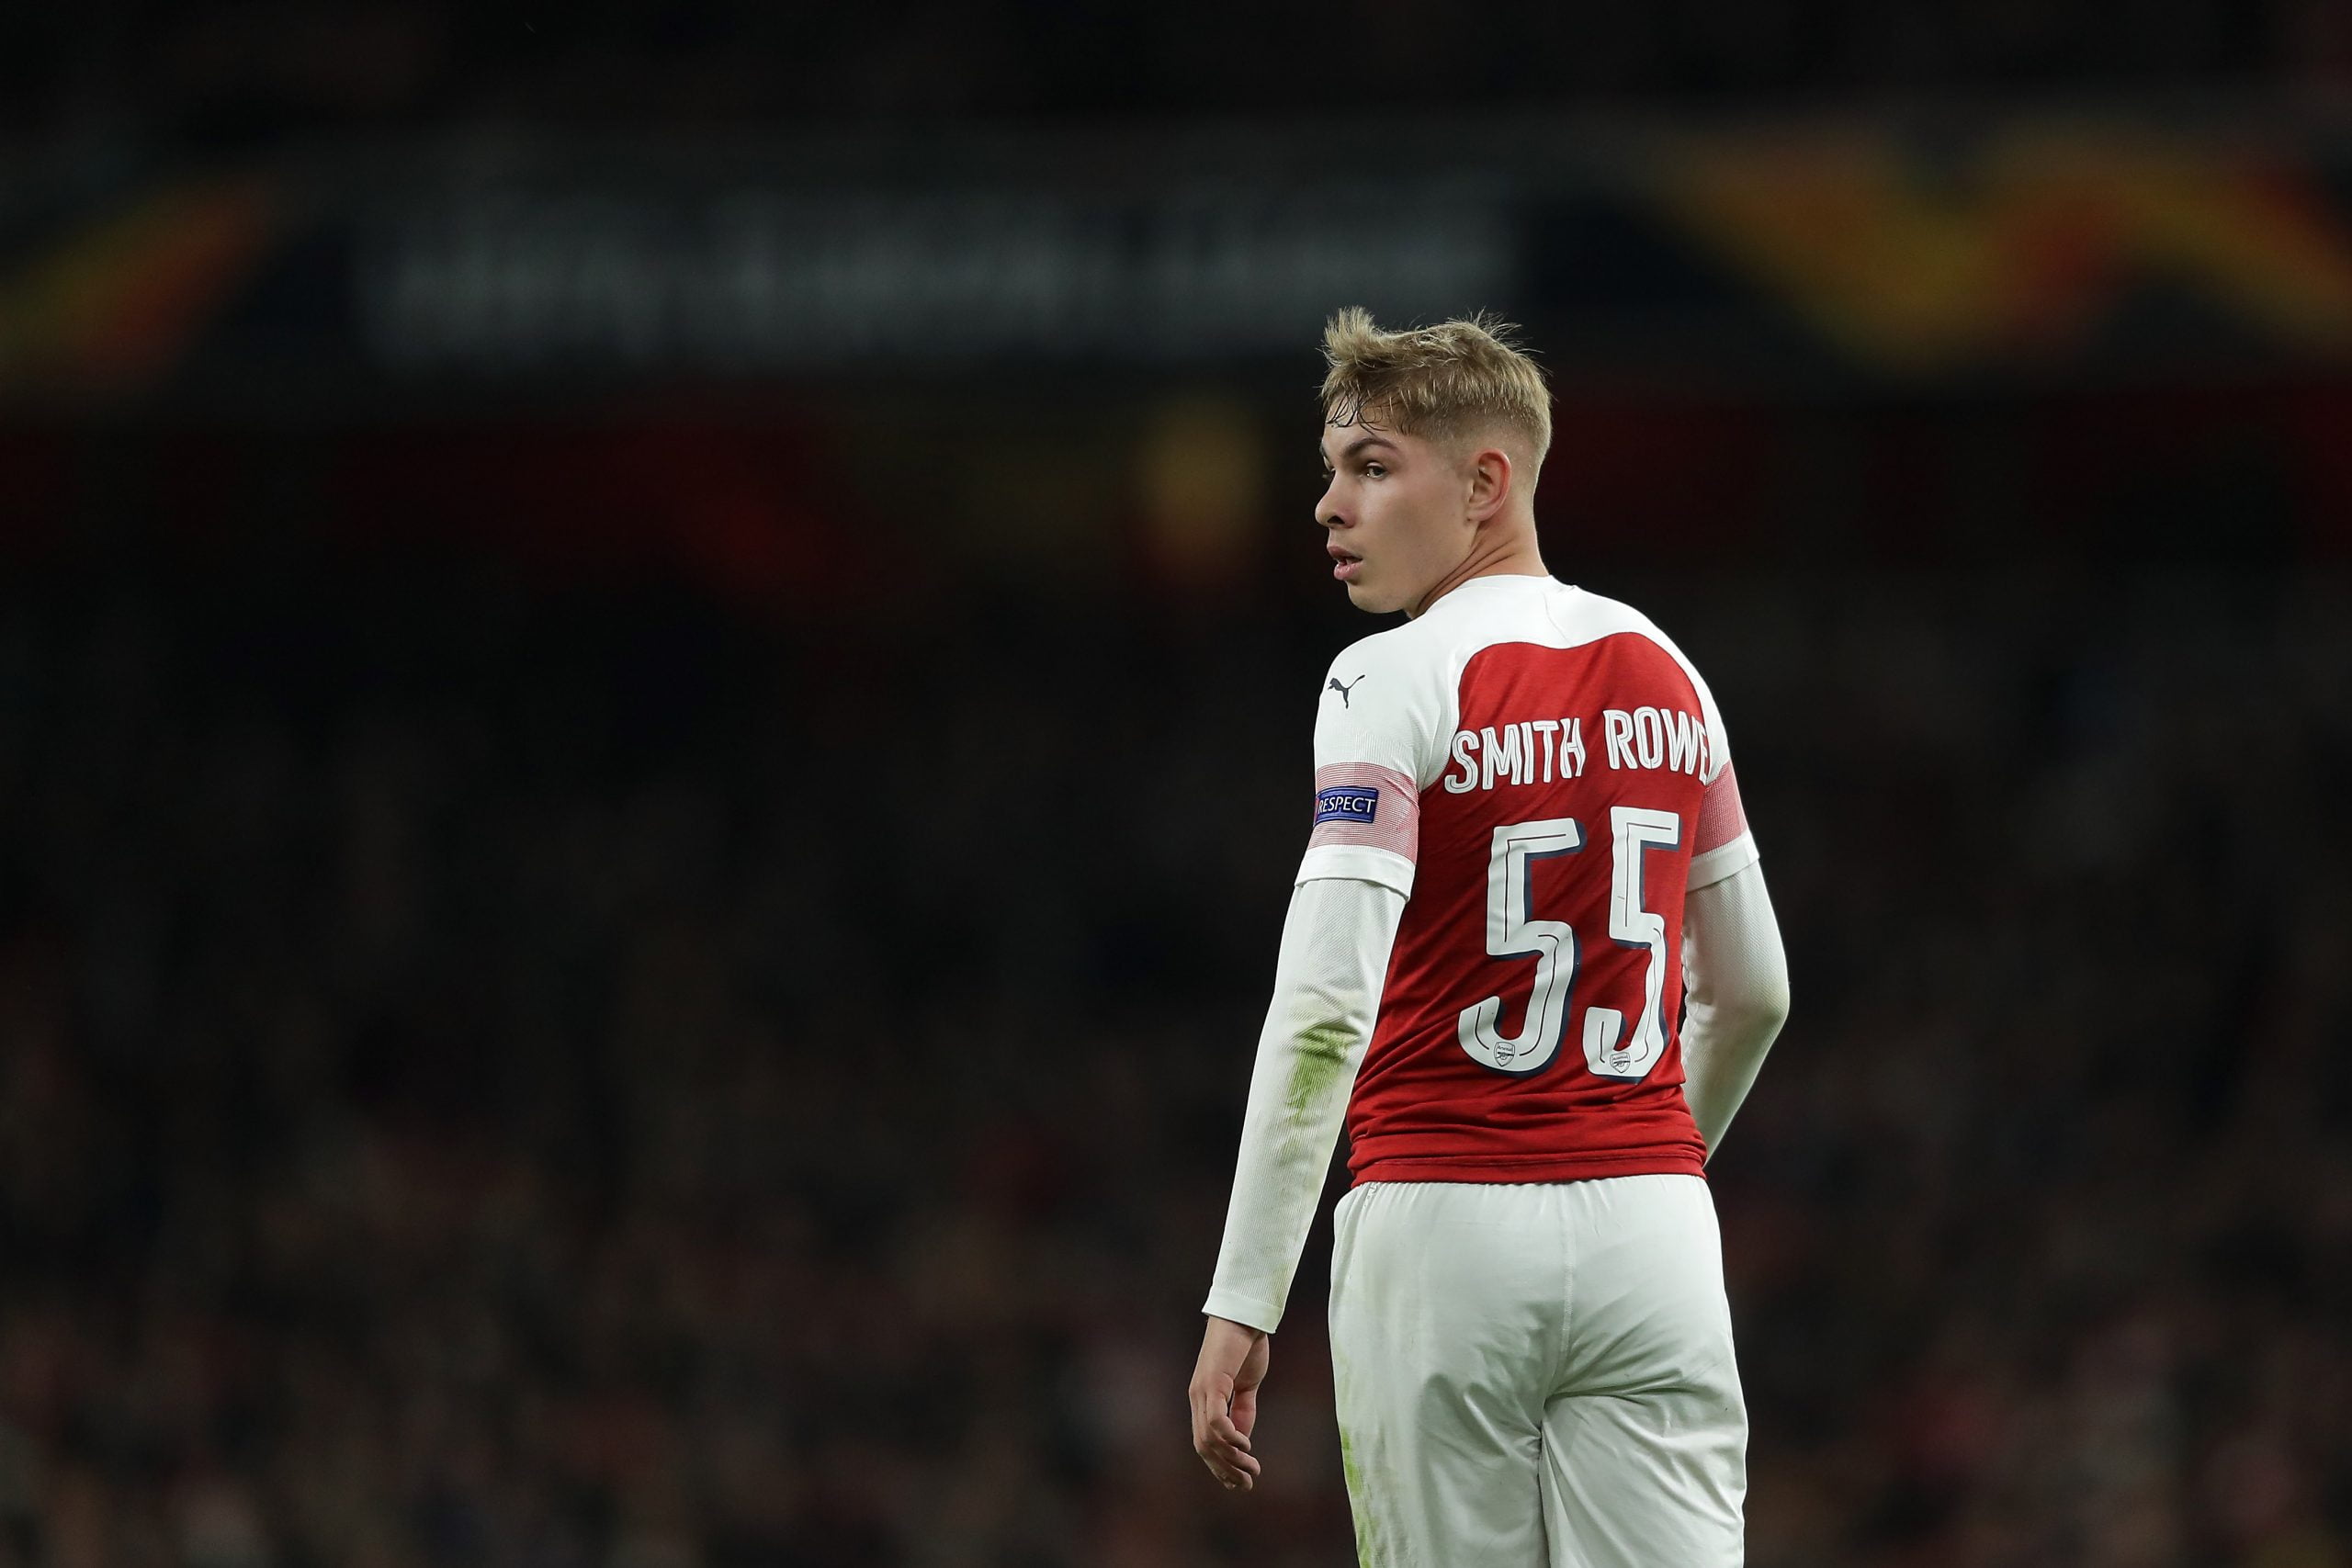 Arsenal prepared to offer Smith Rowe a new contract (Smith Rowe is seen in the picture)